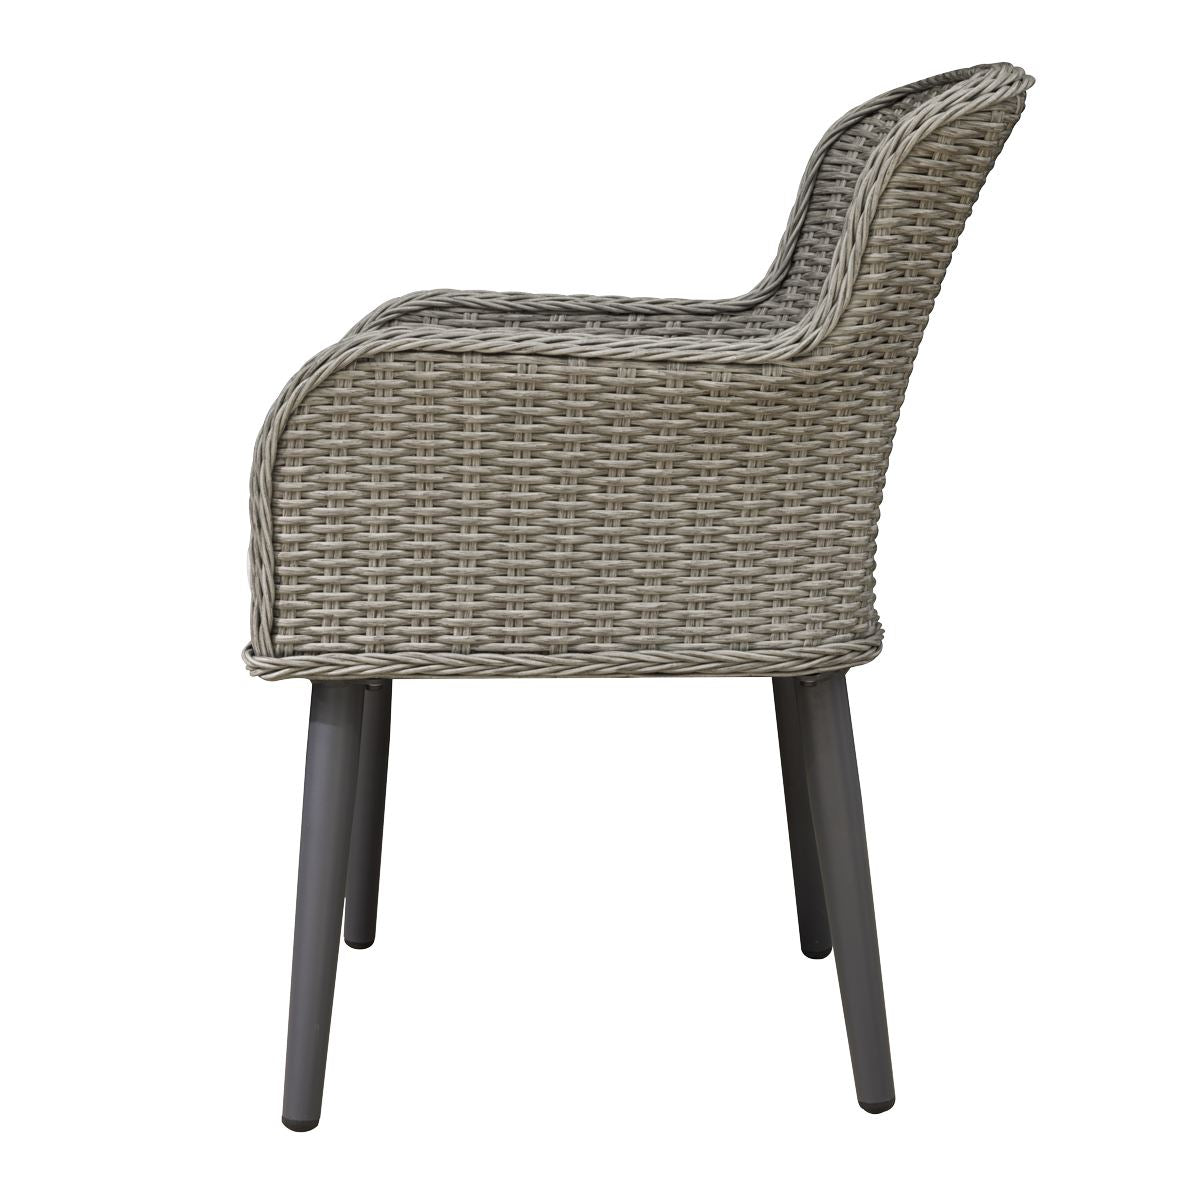 Dellonda Buxton Rattan Wicker Outdoor Dining Armchairs with Cushion, Set of 2, Grey